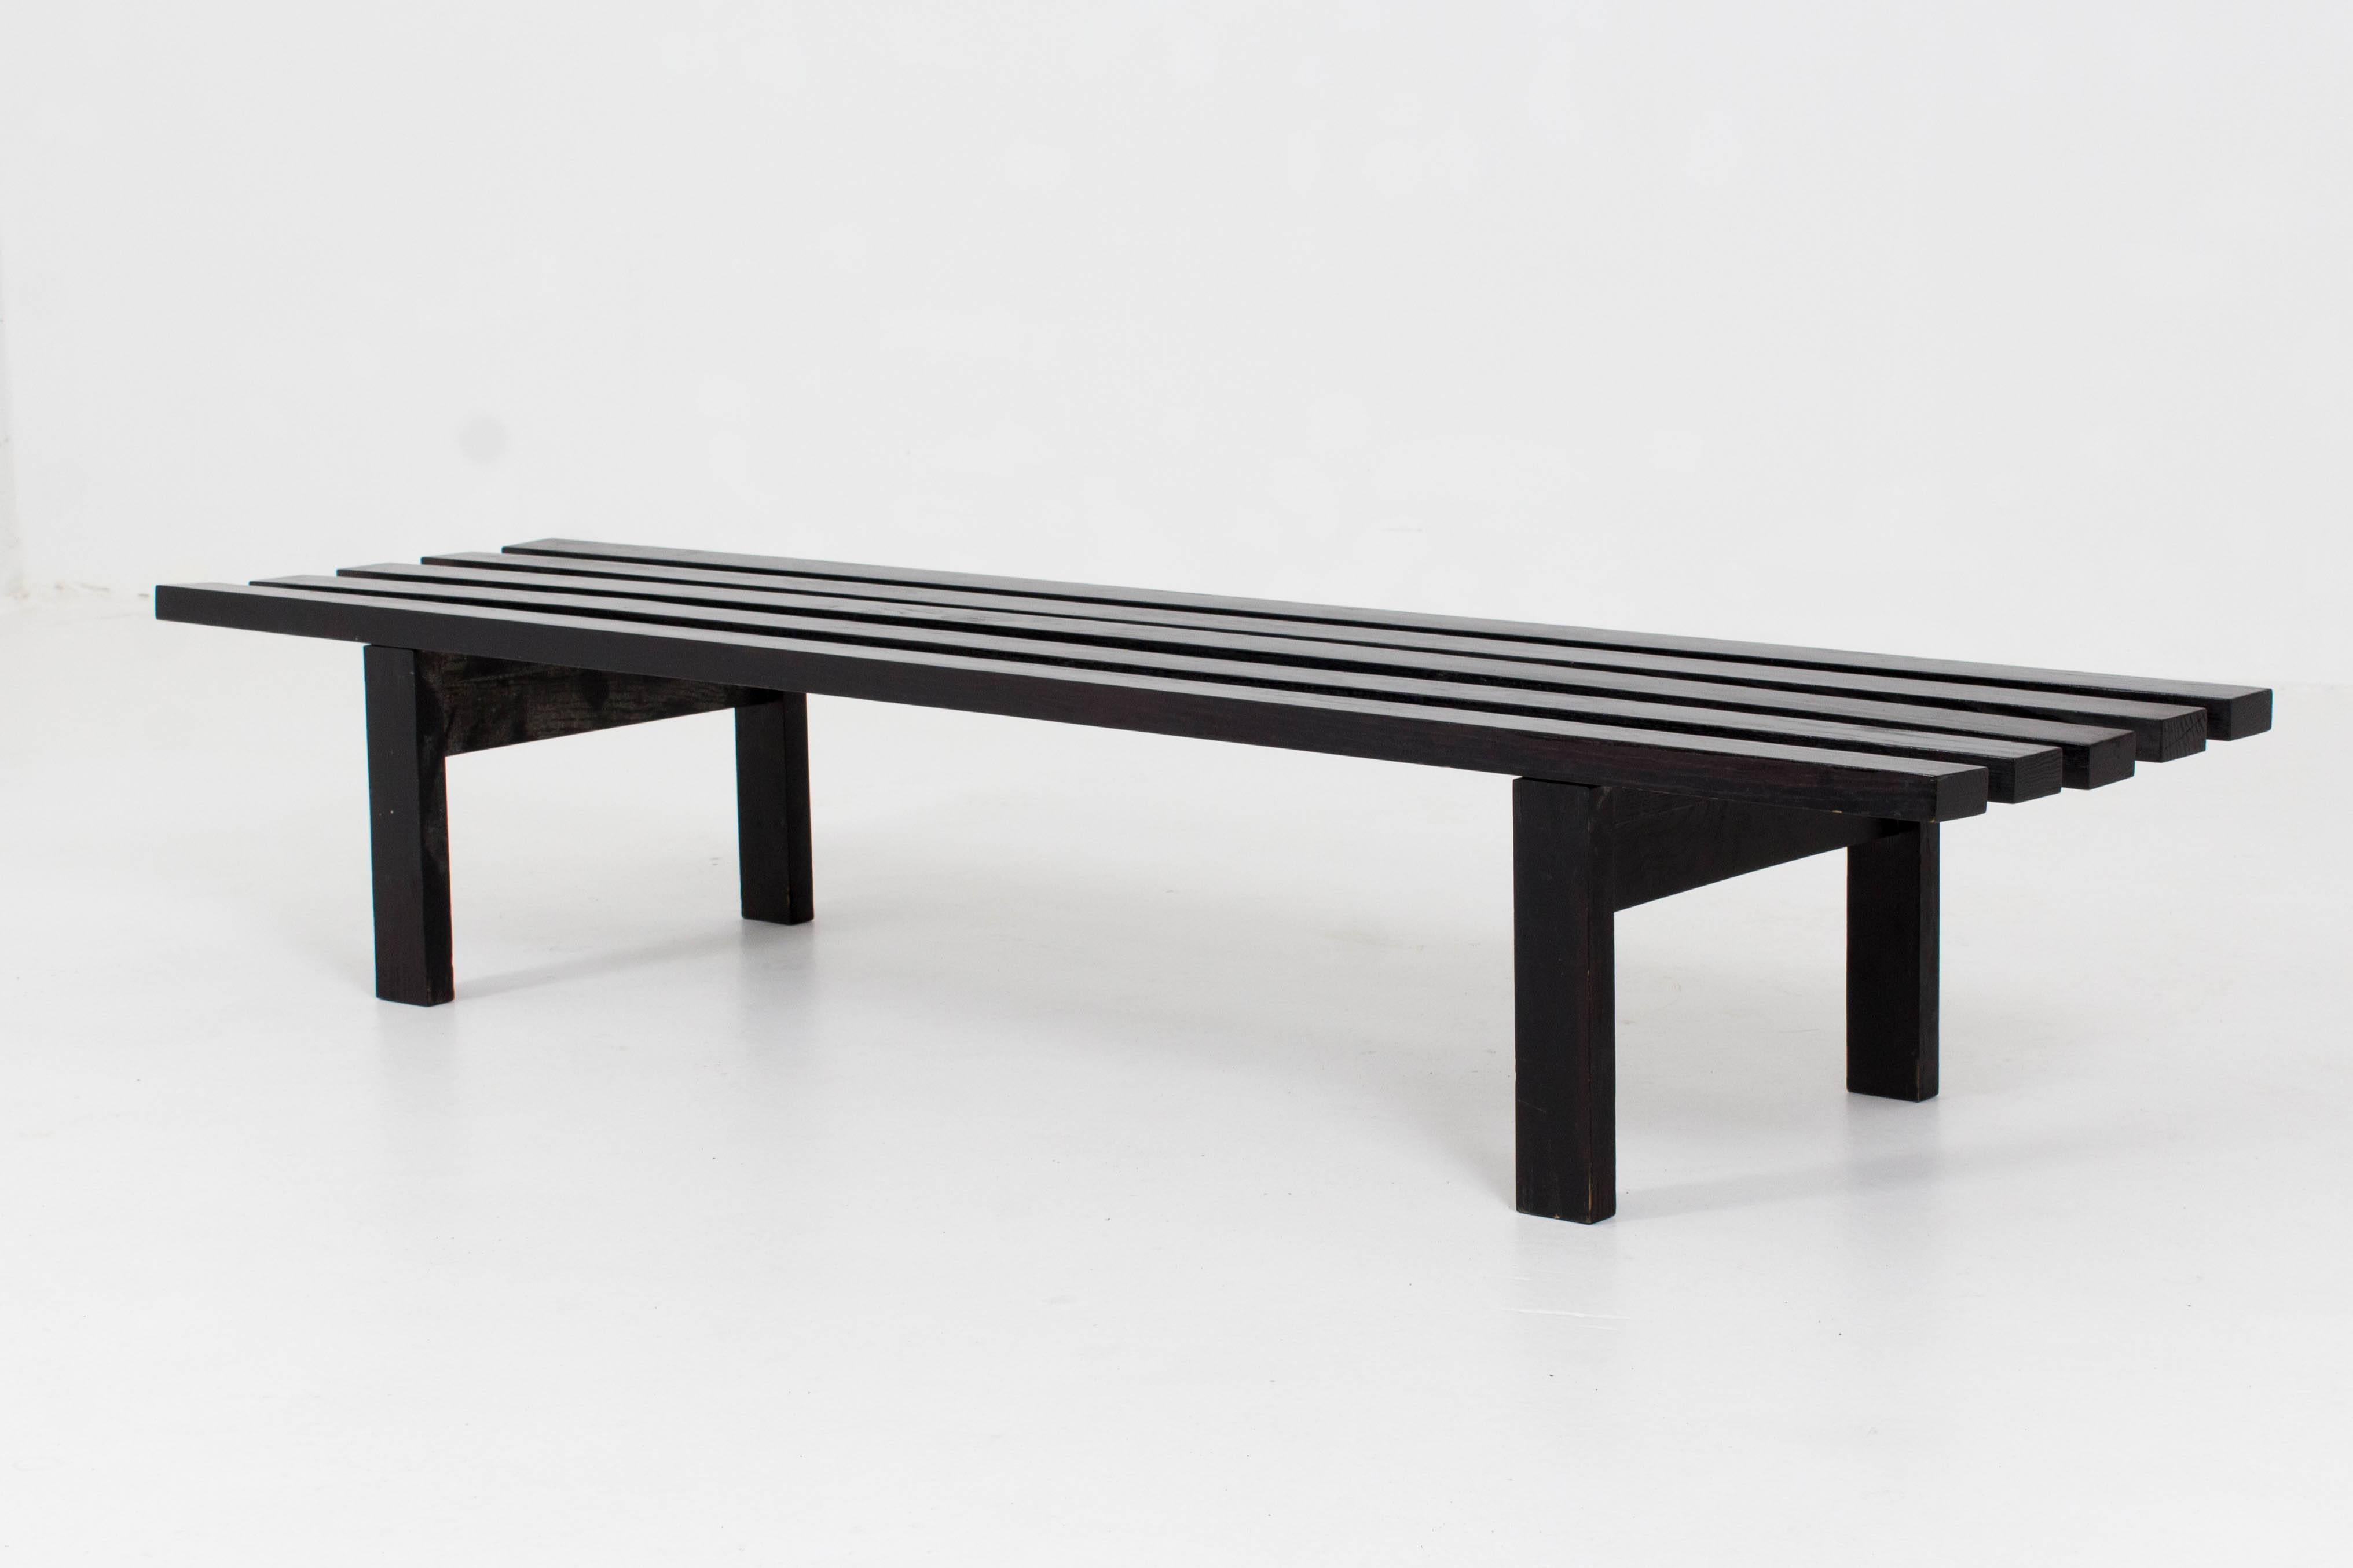 Mid-Century Modern BZ71 slat bench by Martin Visser for 't Spectrum 1960s.
Solid black stained ashwood slats.
Originally designed for 't Stedelijk Museum Amsterdam.
Marked with manufacturers sticker.
In good original condition with minor wear